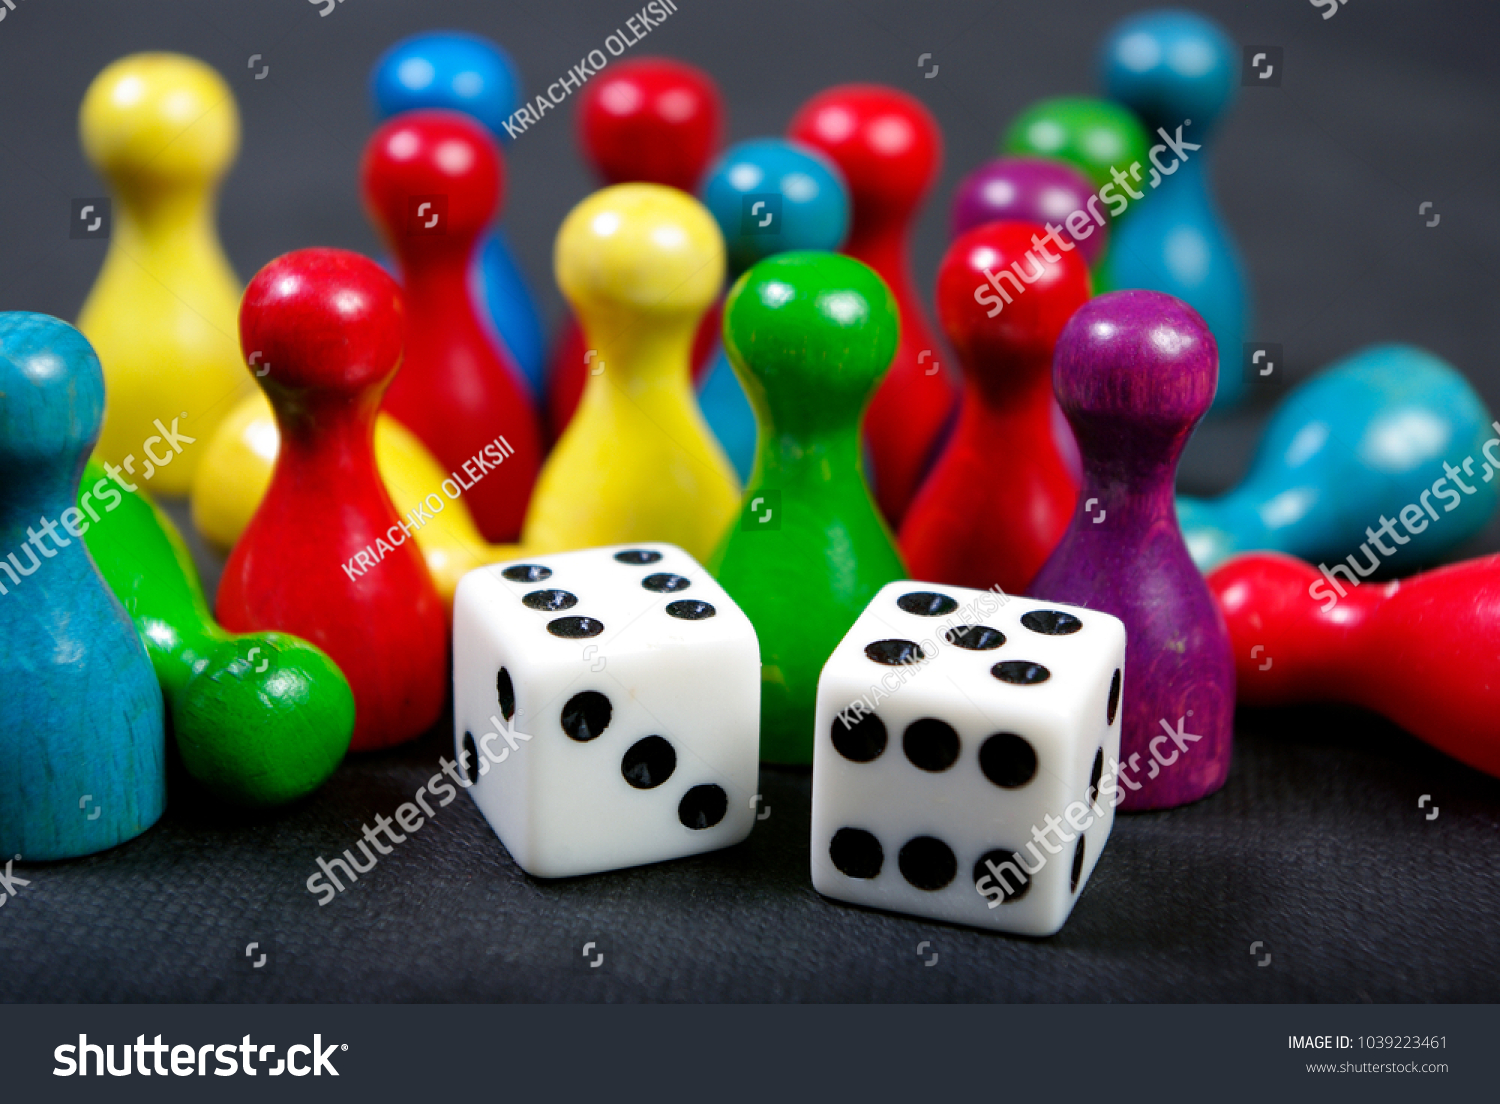 colorful play figures with dice on board #1039223461